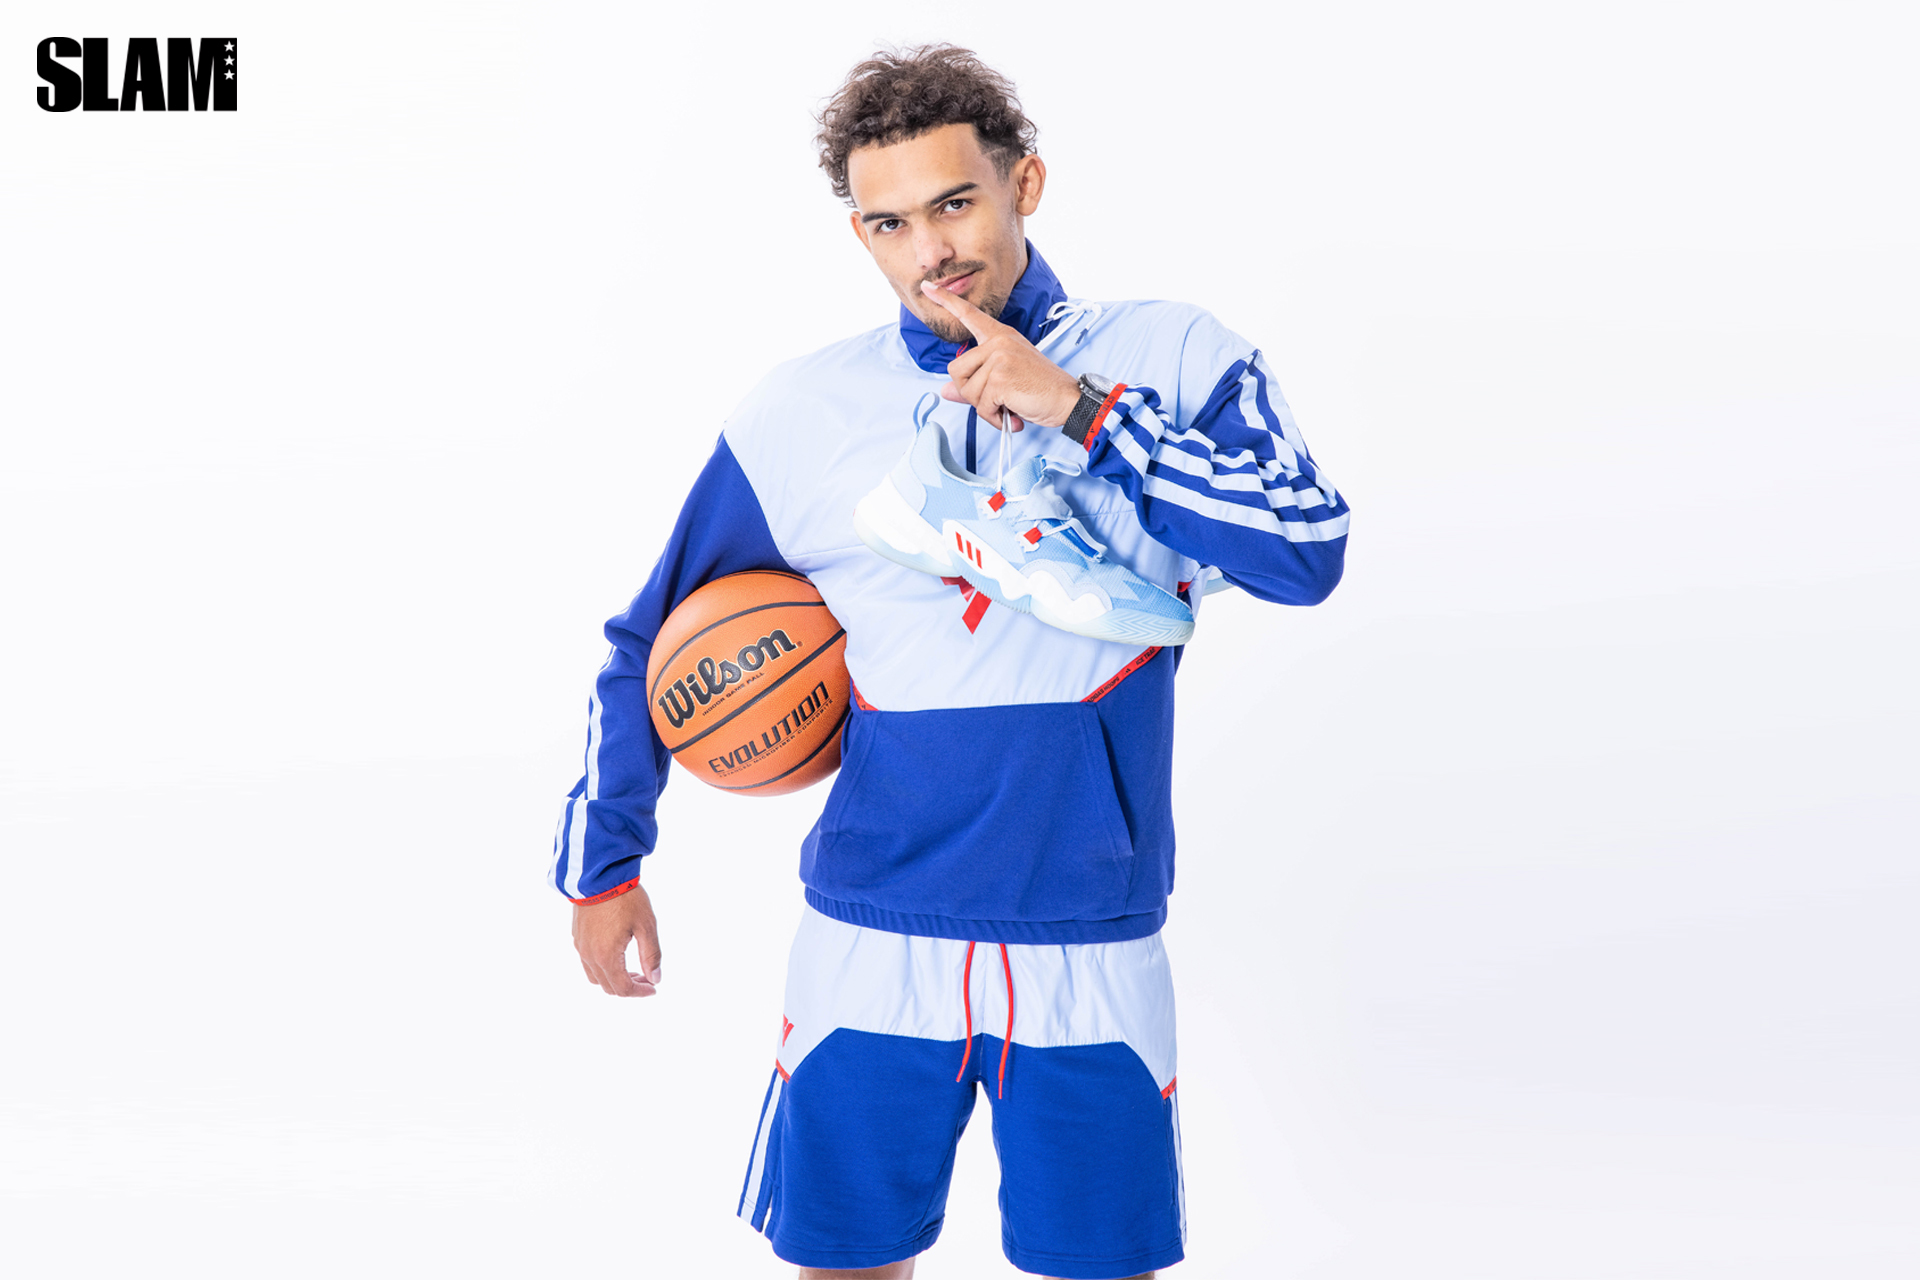 ICE TRAE YOUNG by Ken Osh Tan on Dribbble